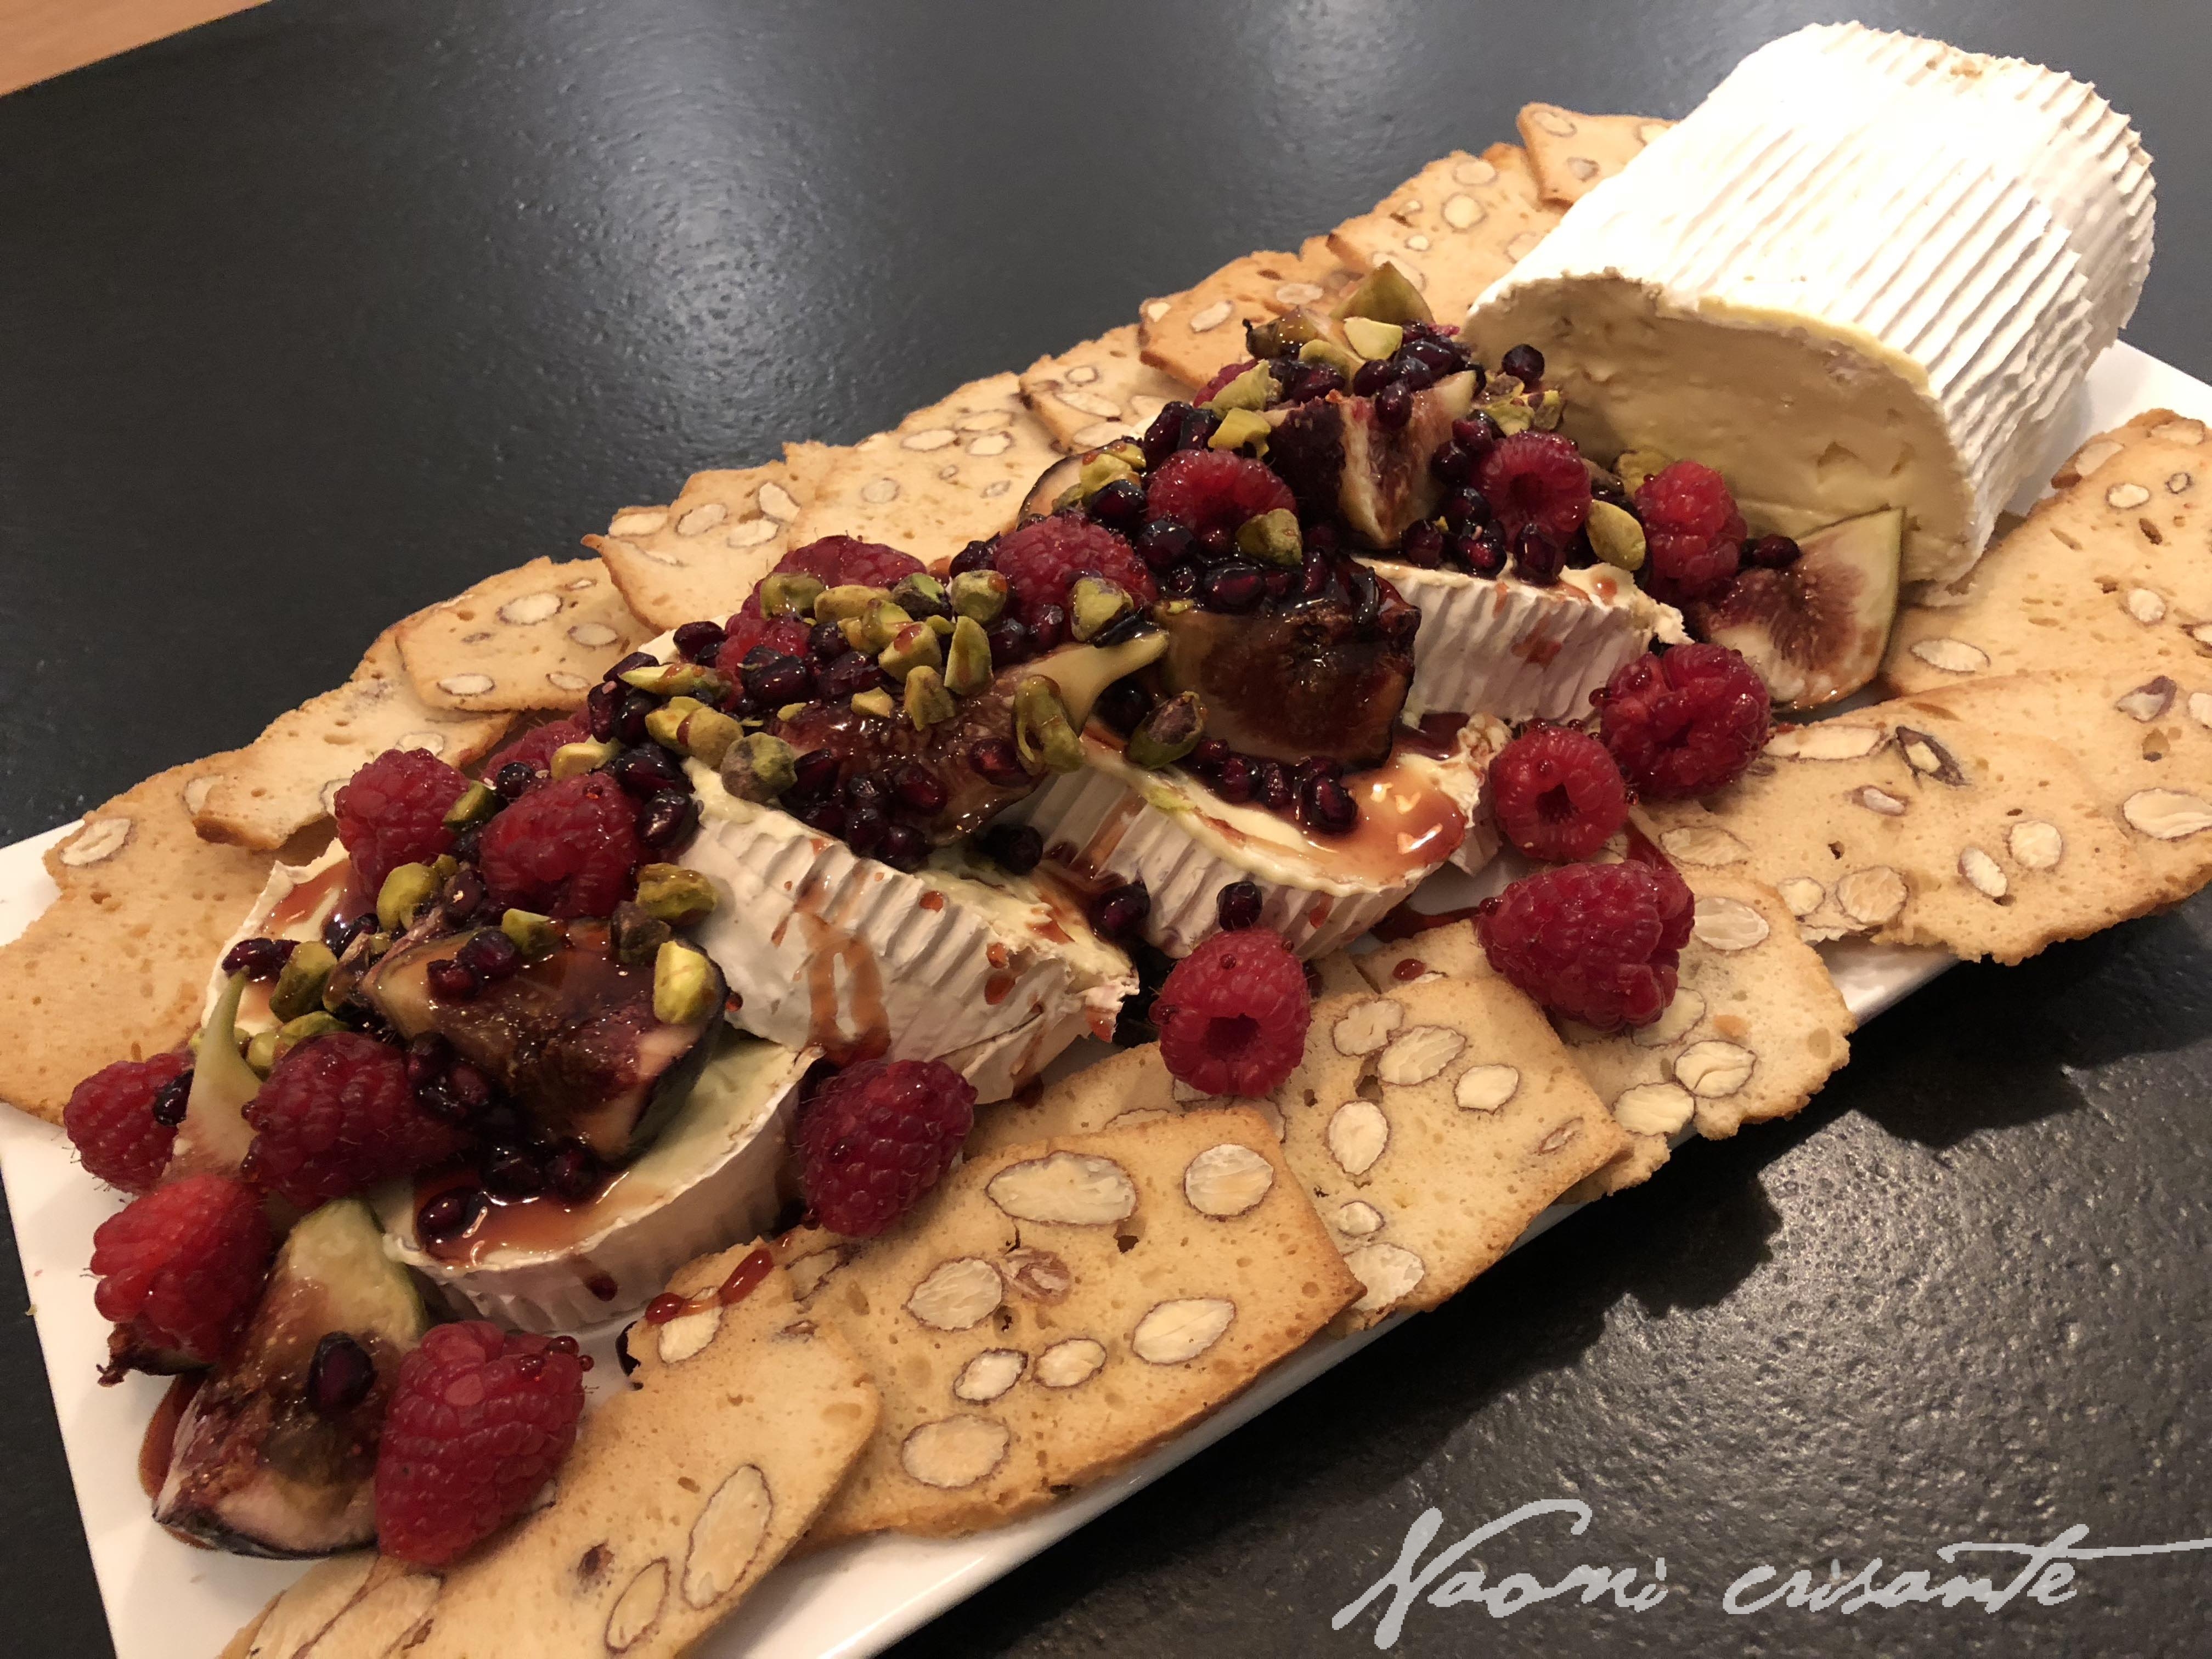 Triple Cream Brie with Figs, Raspberries and Pomegranate